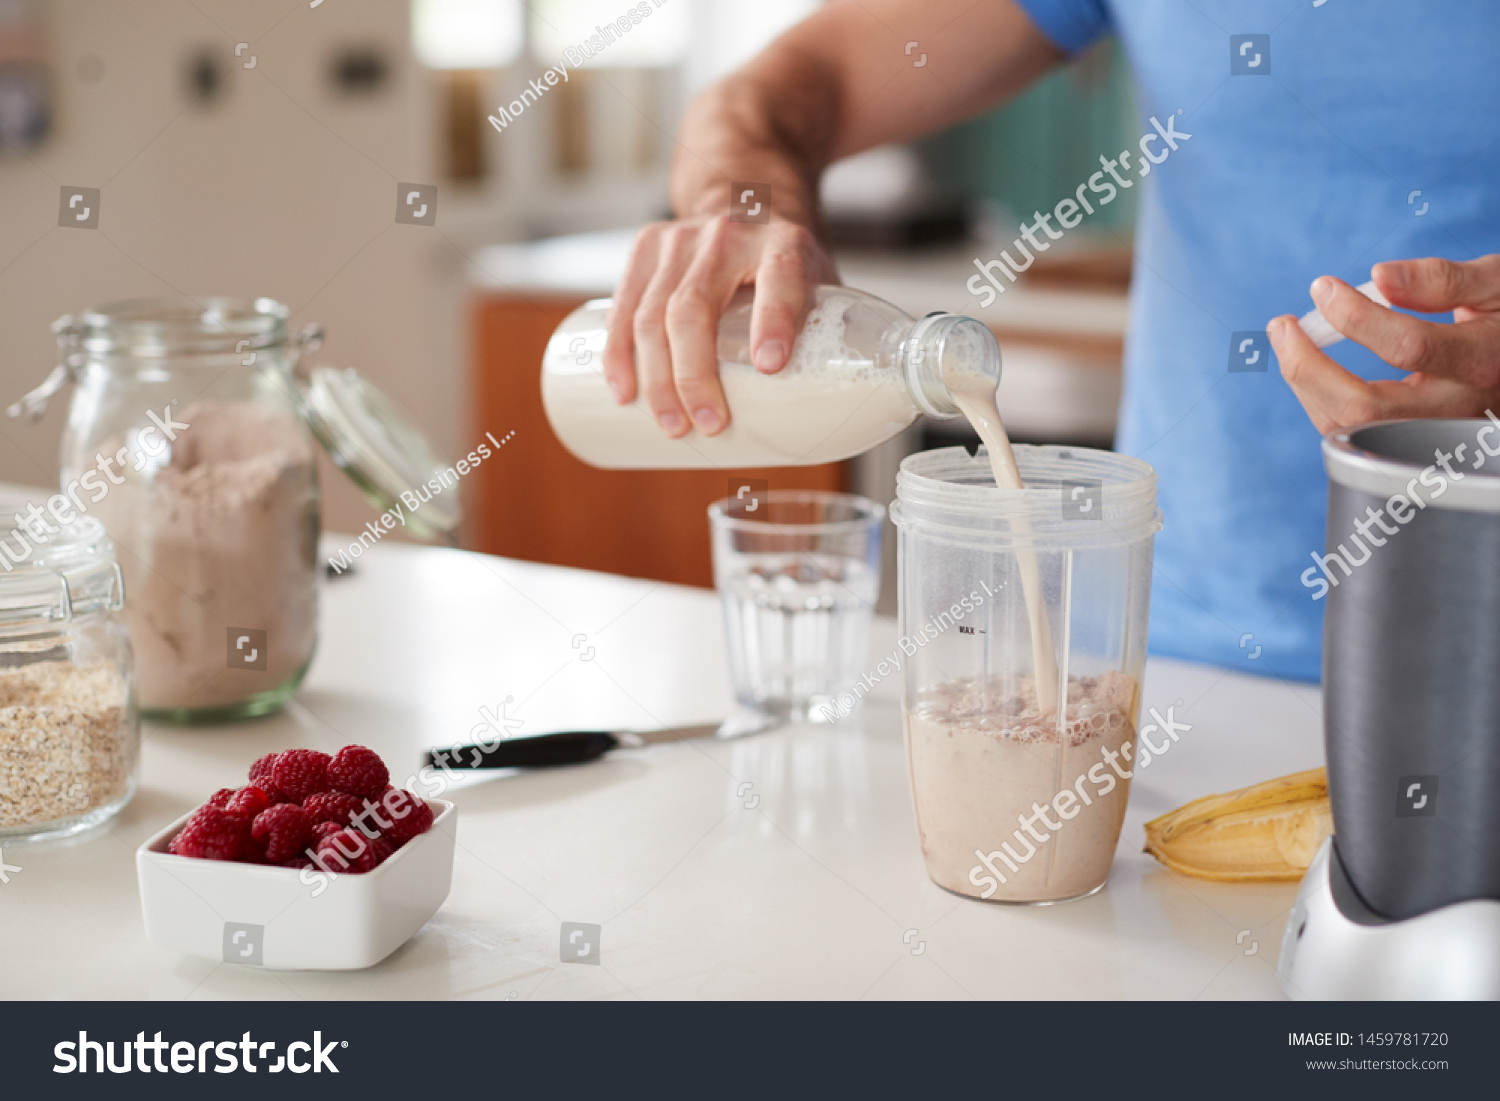 Close Up Of Man Making Protein Shake After Exercise At Home #1459781720